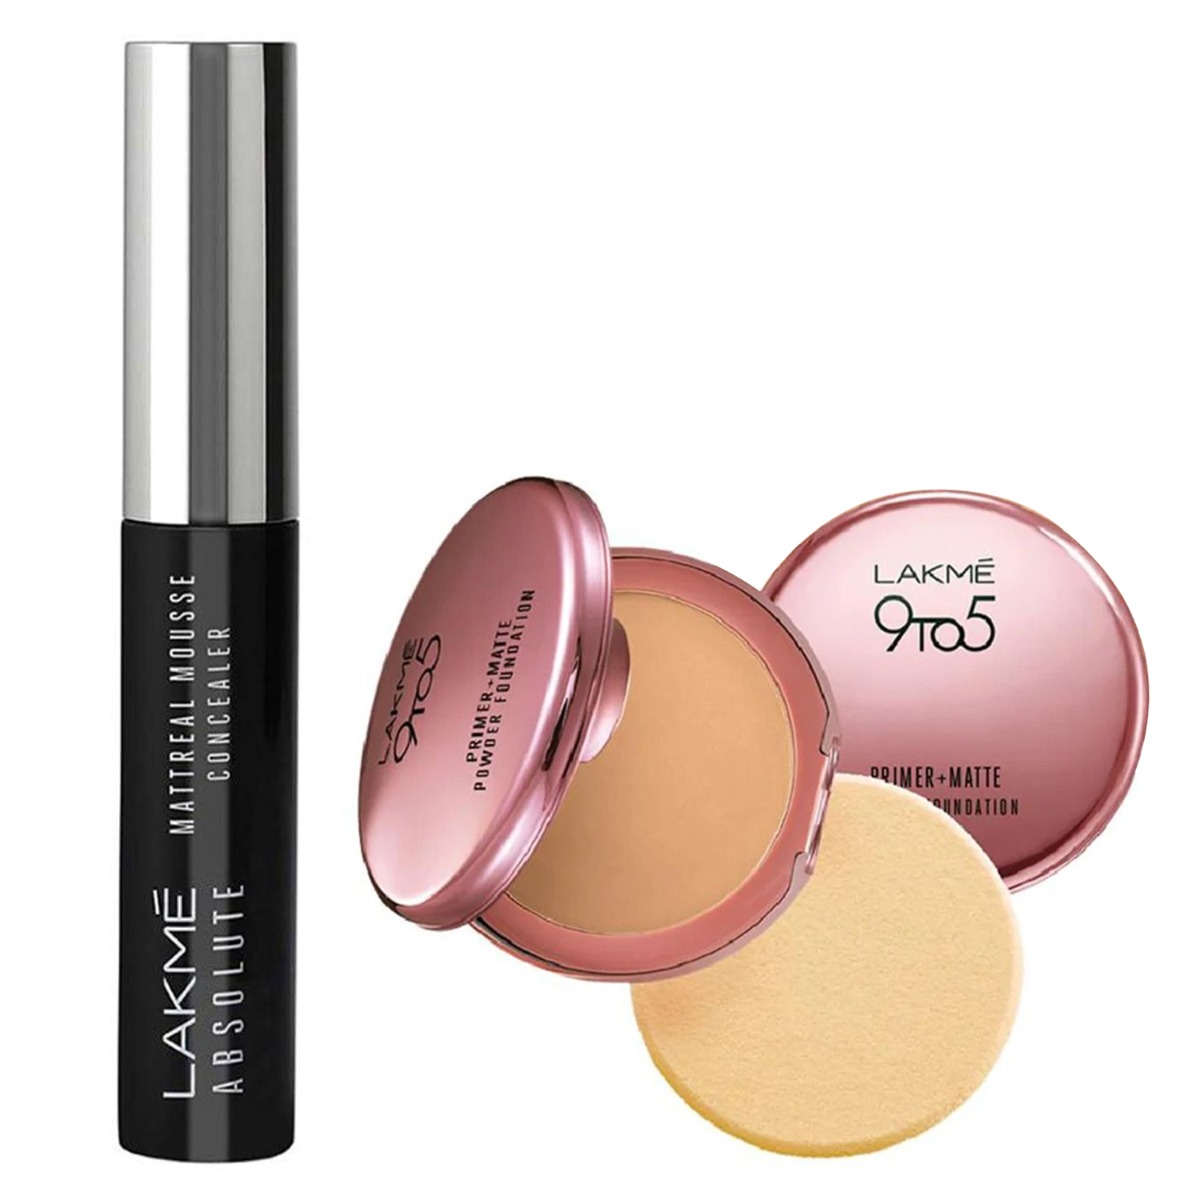 Lakme 9 to 5 Primer + Matte powder foundation - Silky Golden & Absolute Mattereal Mousse Concealer - Natural, 9gm Each